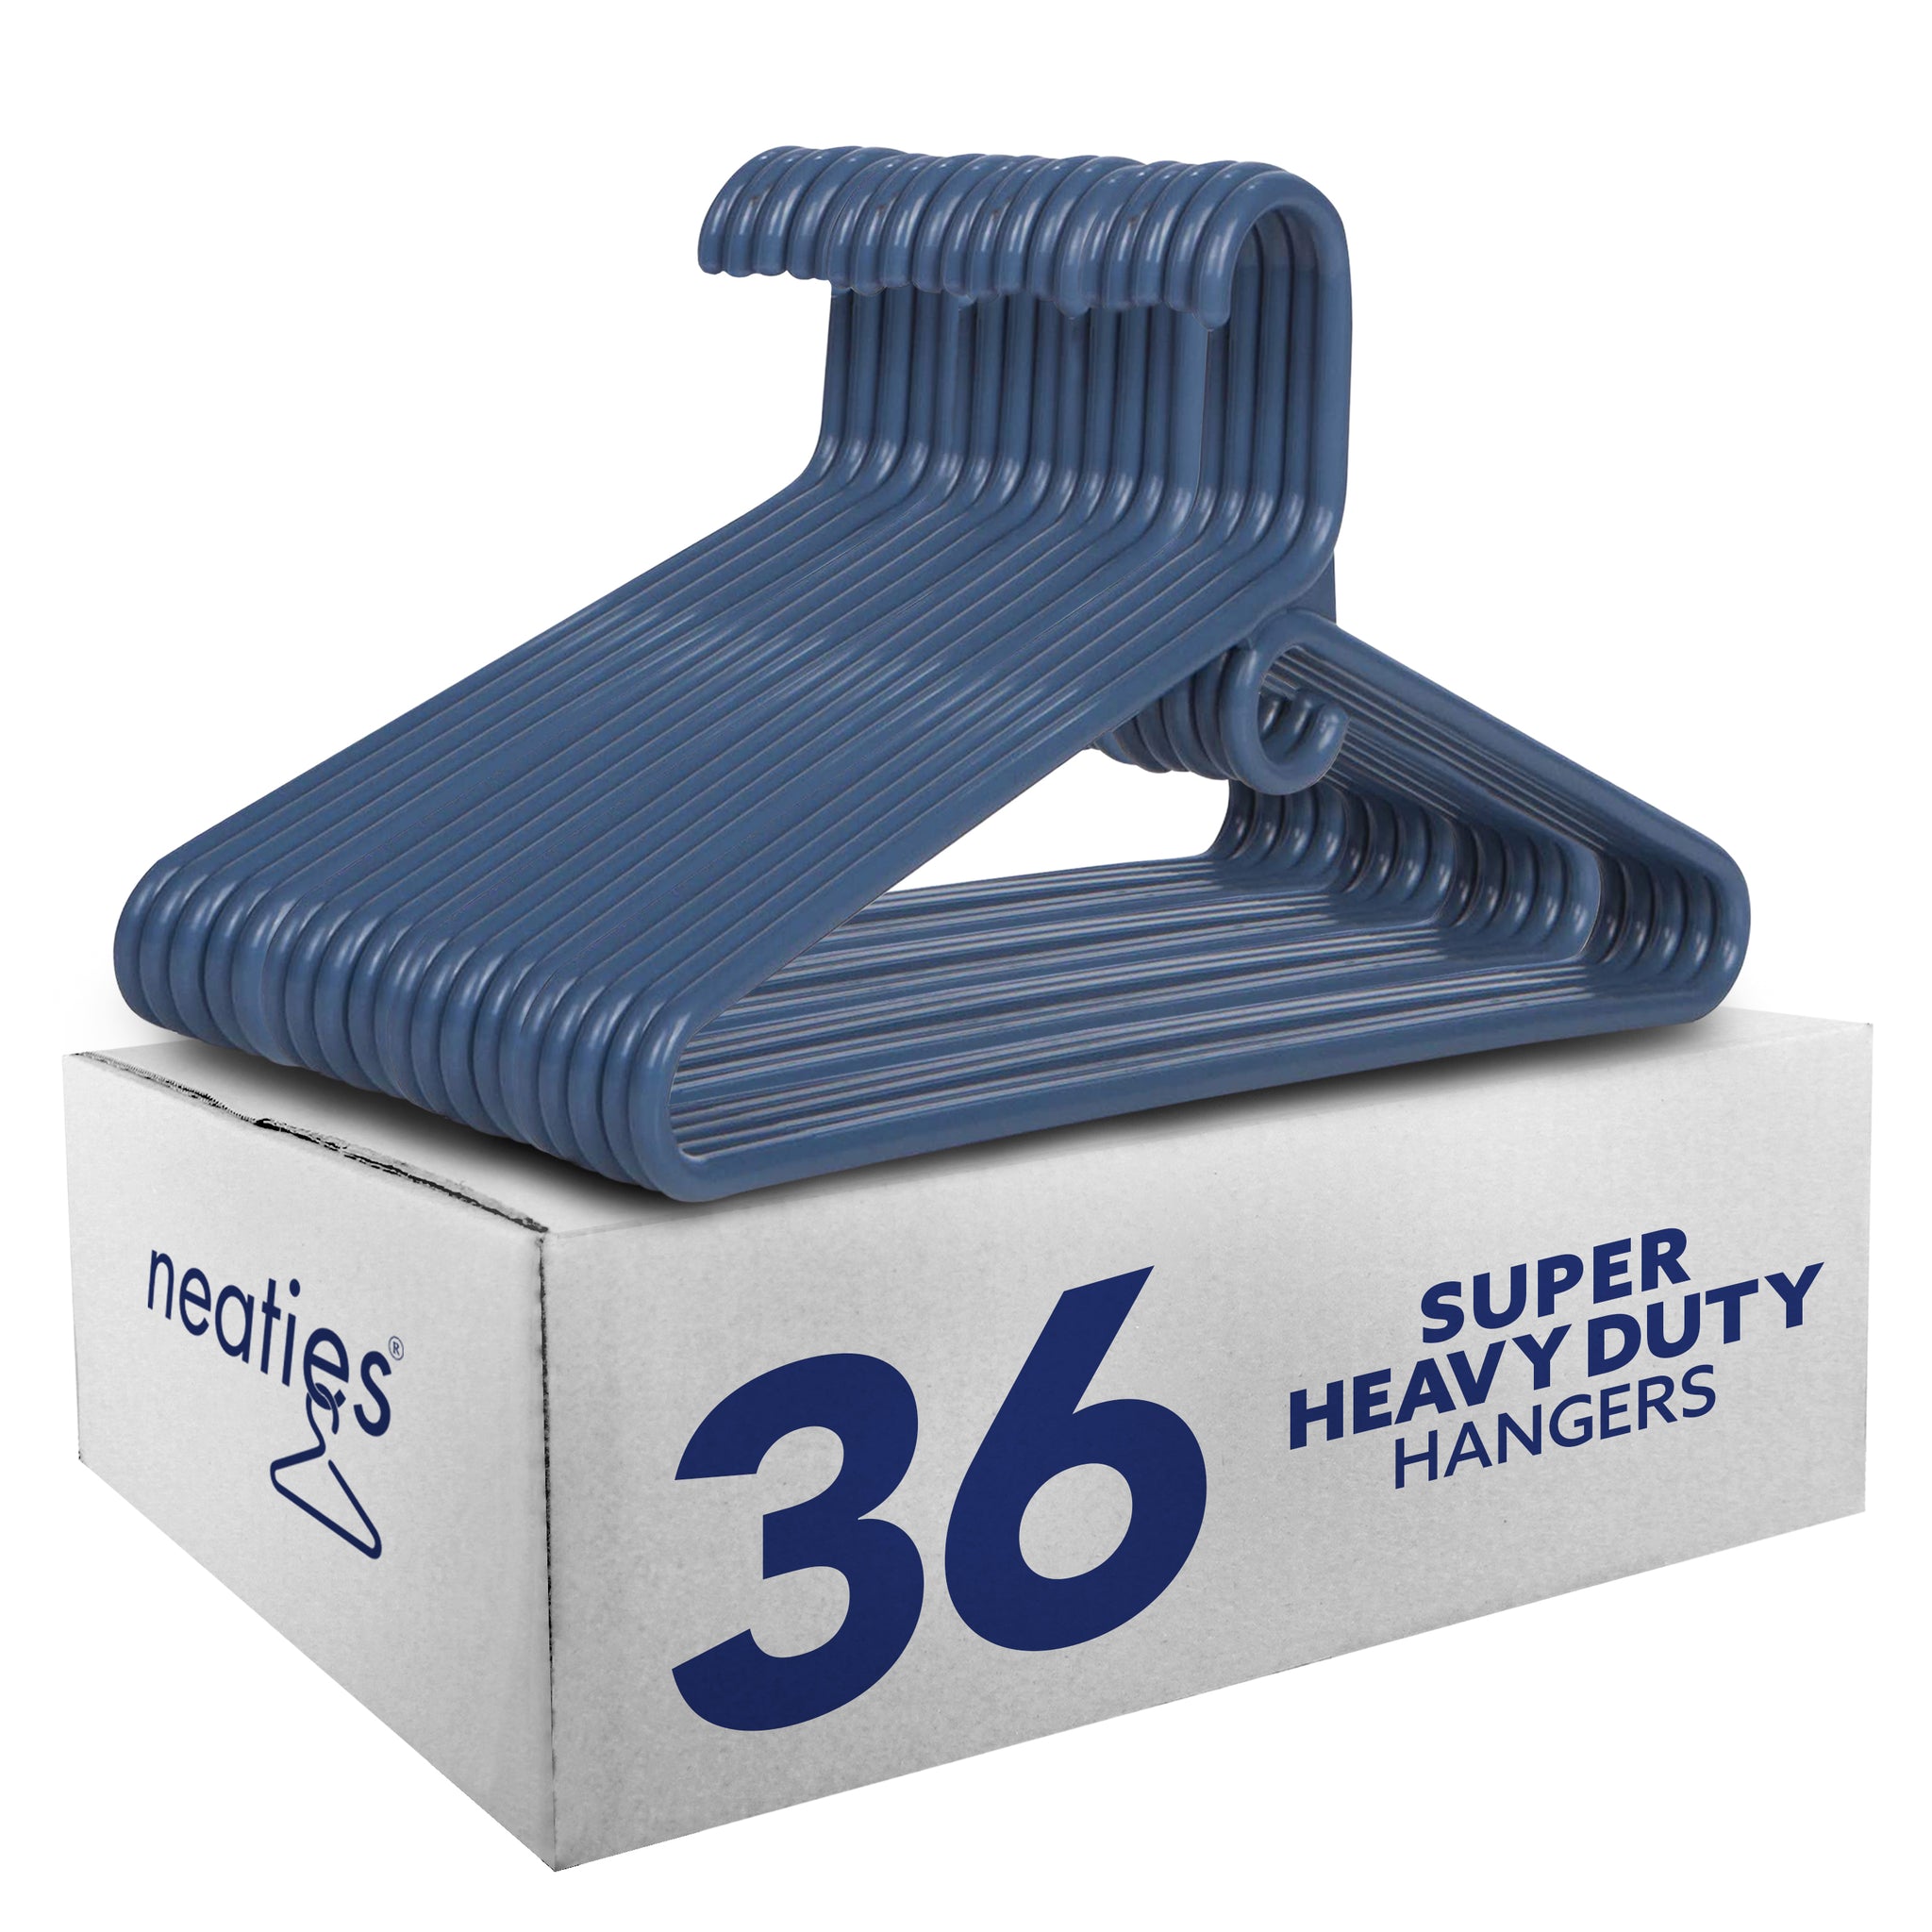 Heavy-Duty Tubular Hangers Navy Blue Pkg/12, 16-1/2 x 3/8 x 8-1/4 H | The Container Store